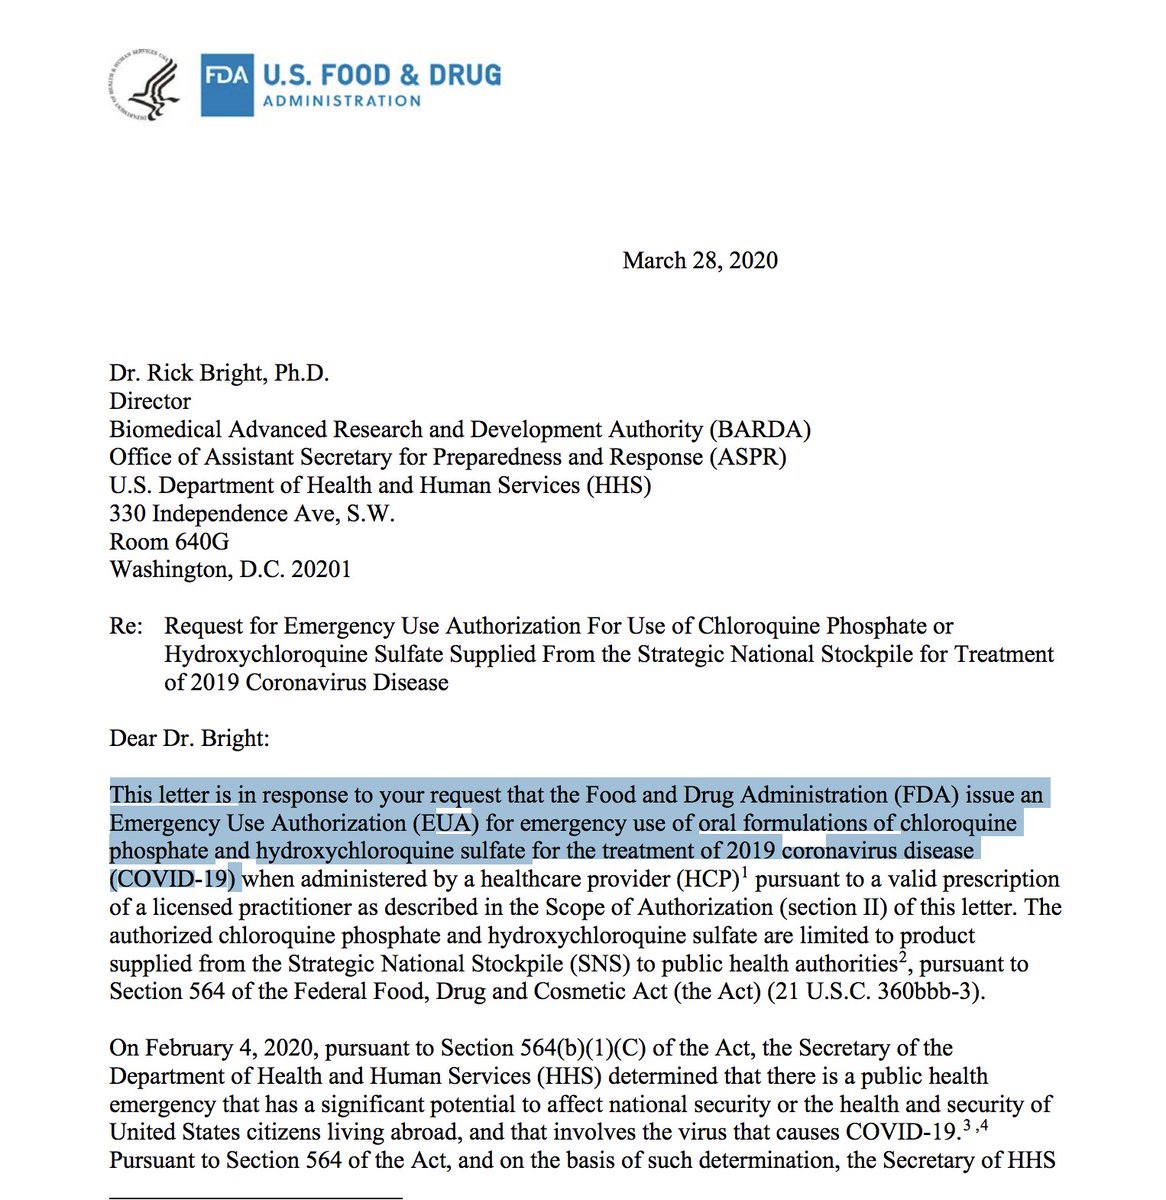 He says "he insisted"... I do not have the text of his request, but the FDA's response puts the limitations he mentioned today as a condition for the approval back in March. https://www.fda.gov/media/136534/download